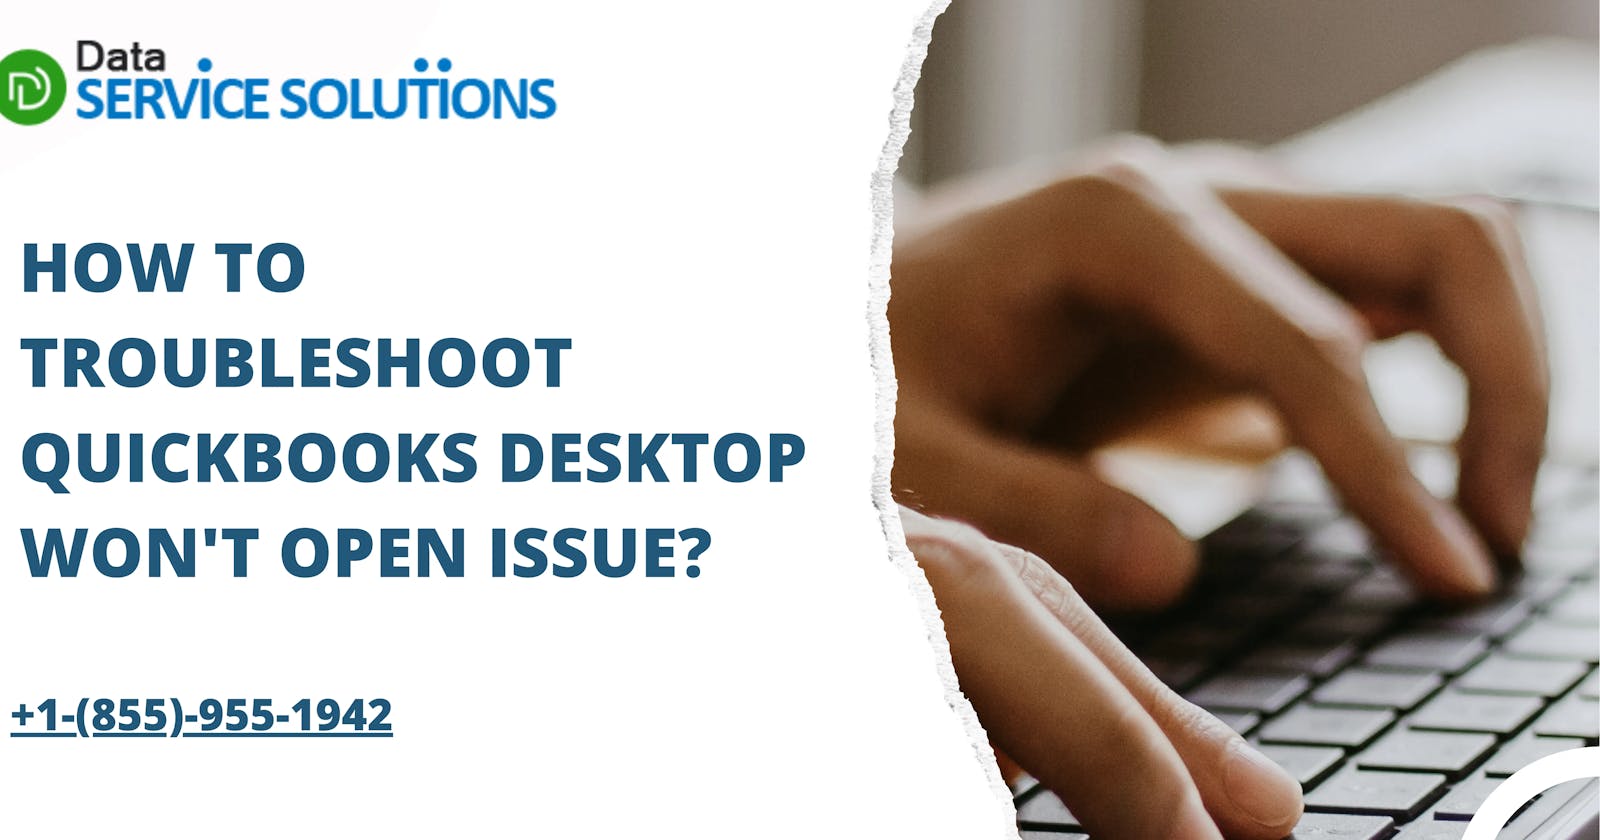 How To Troubleshoot QuickBooks Desktop Won't Open Issue?